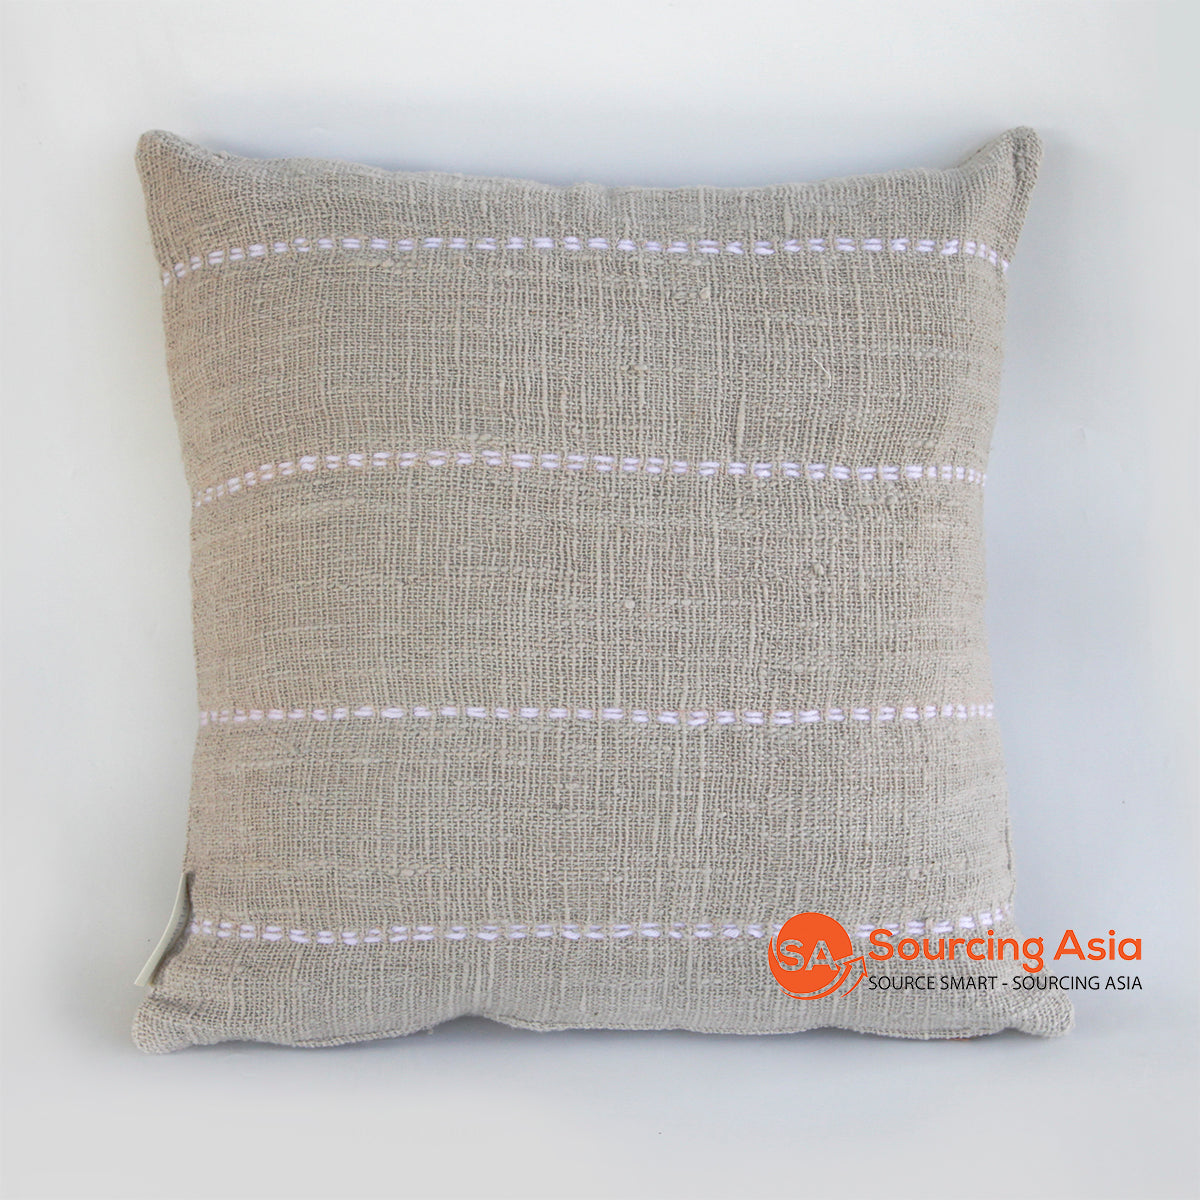 HIP031-5A GREY TUMANGGAL SQUARE COVER CUSHION 50X50CM WITH WHITE LINE HAND-STITCHED WITHOUT TASSELS (PRICE WITHOUT INNER)